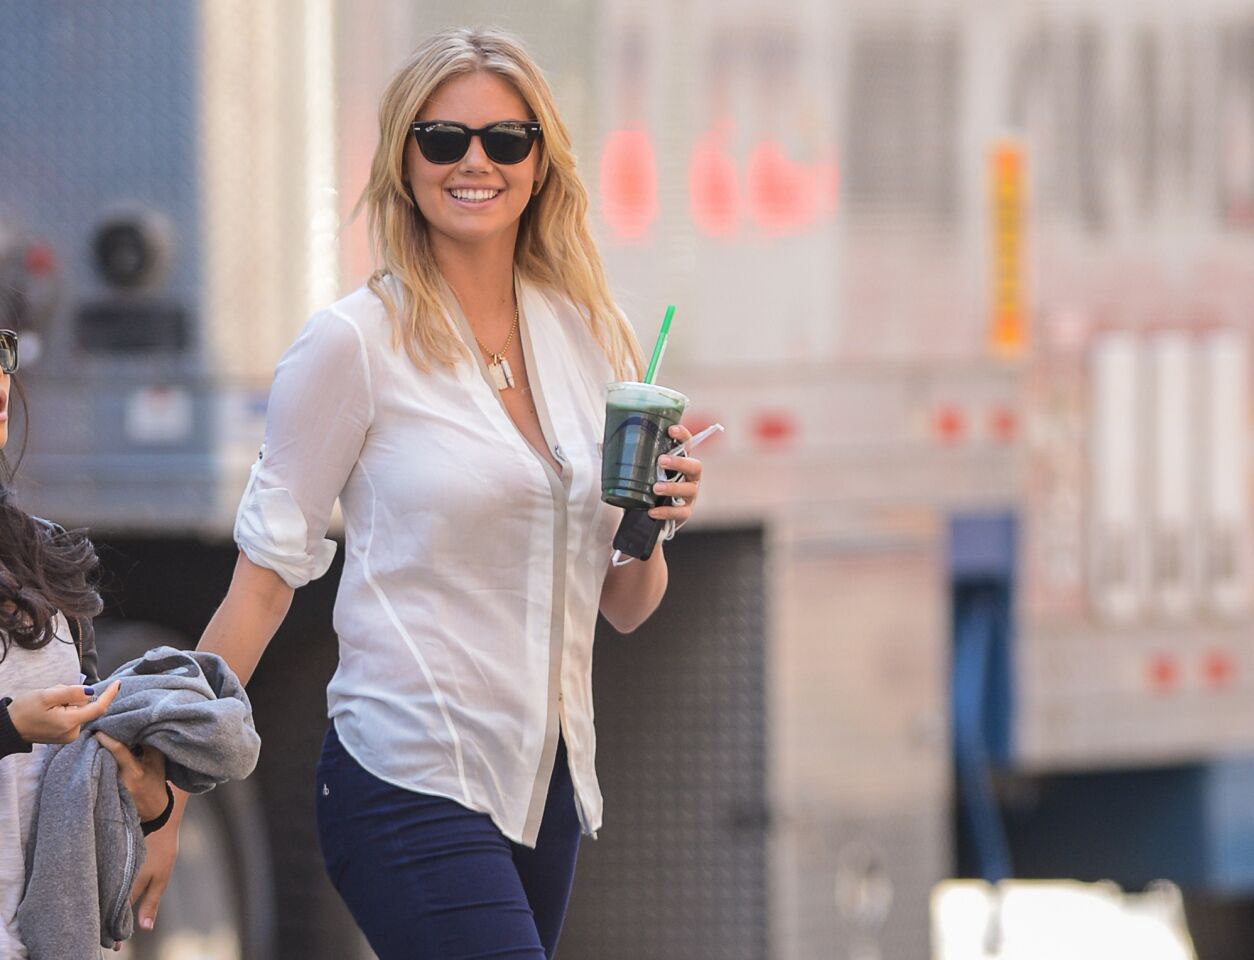 Actress Kate Upton enters her trailer at "The Other Woman" movie set in Tribeca in New York City.